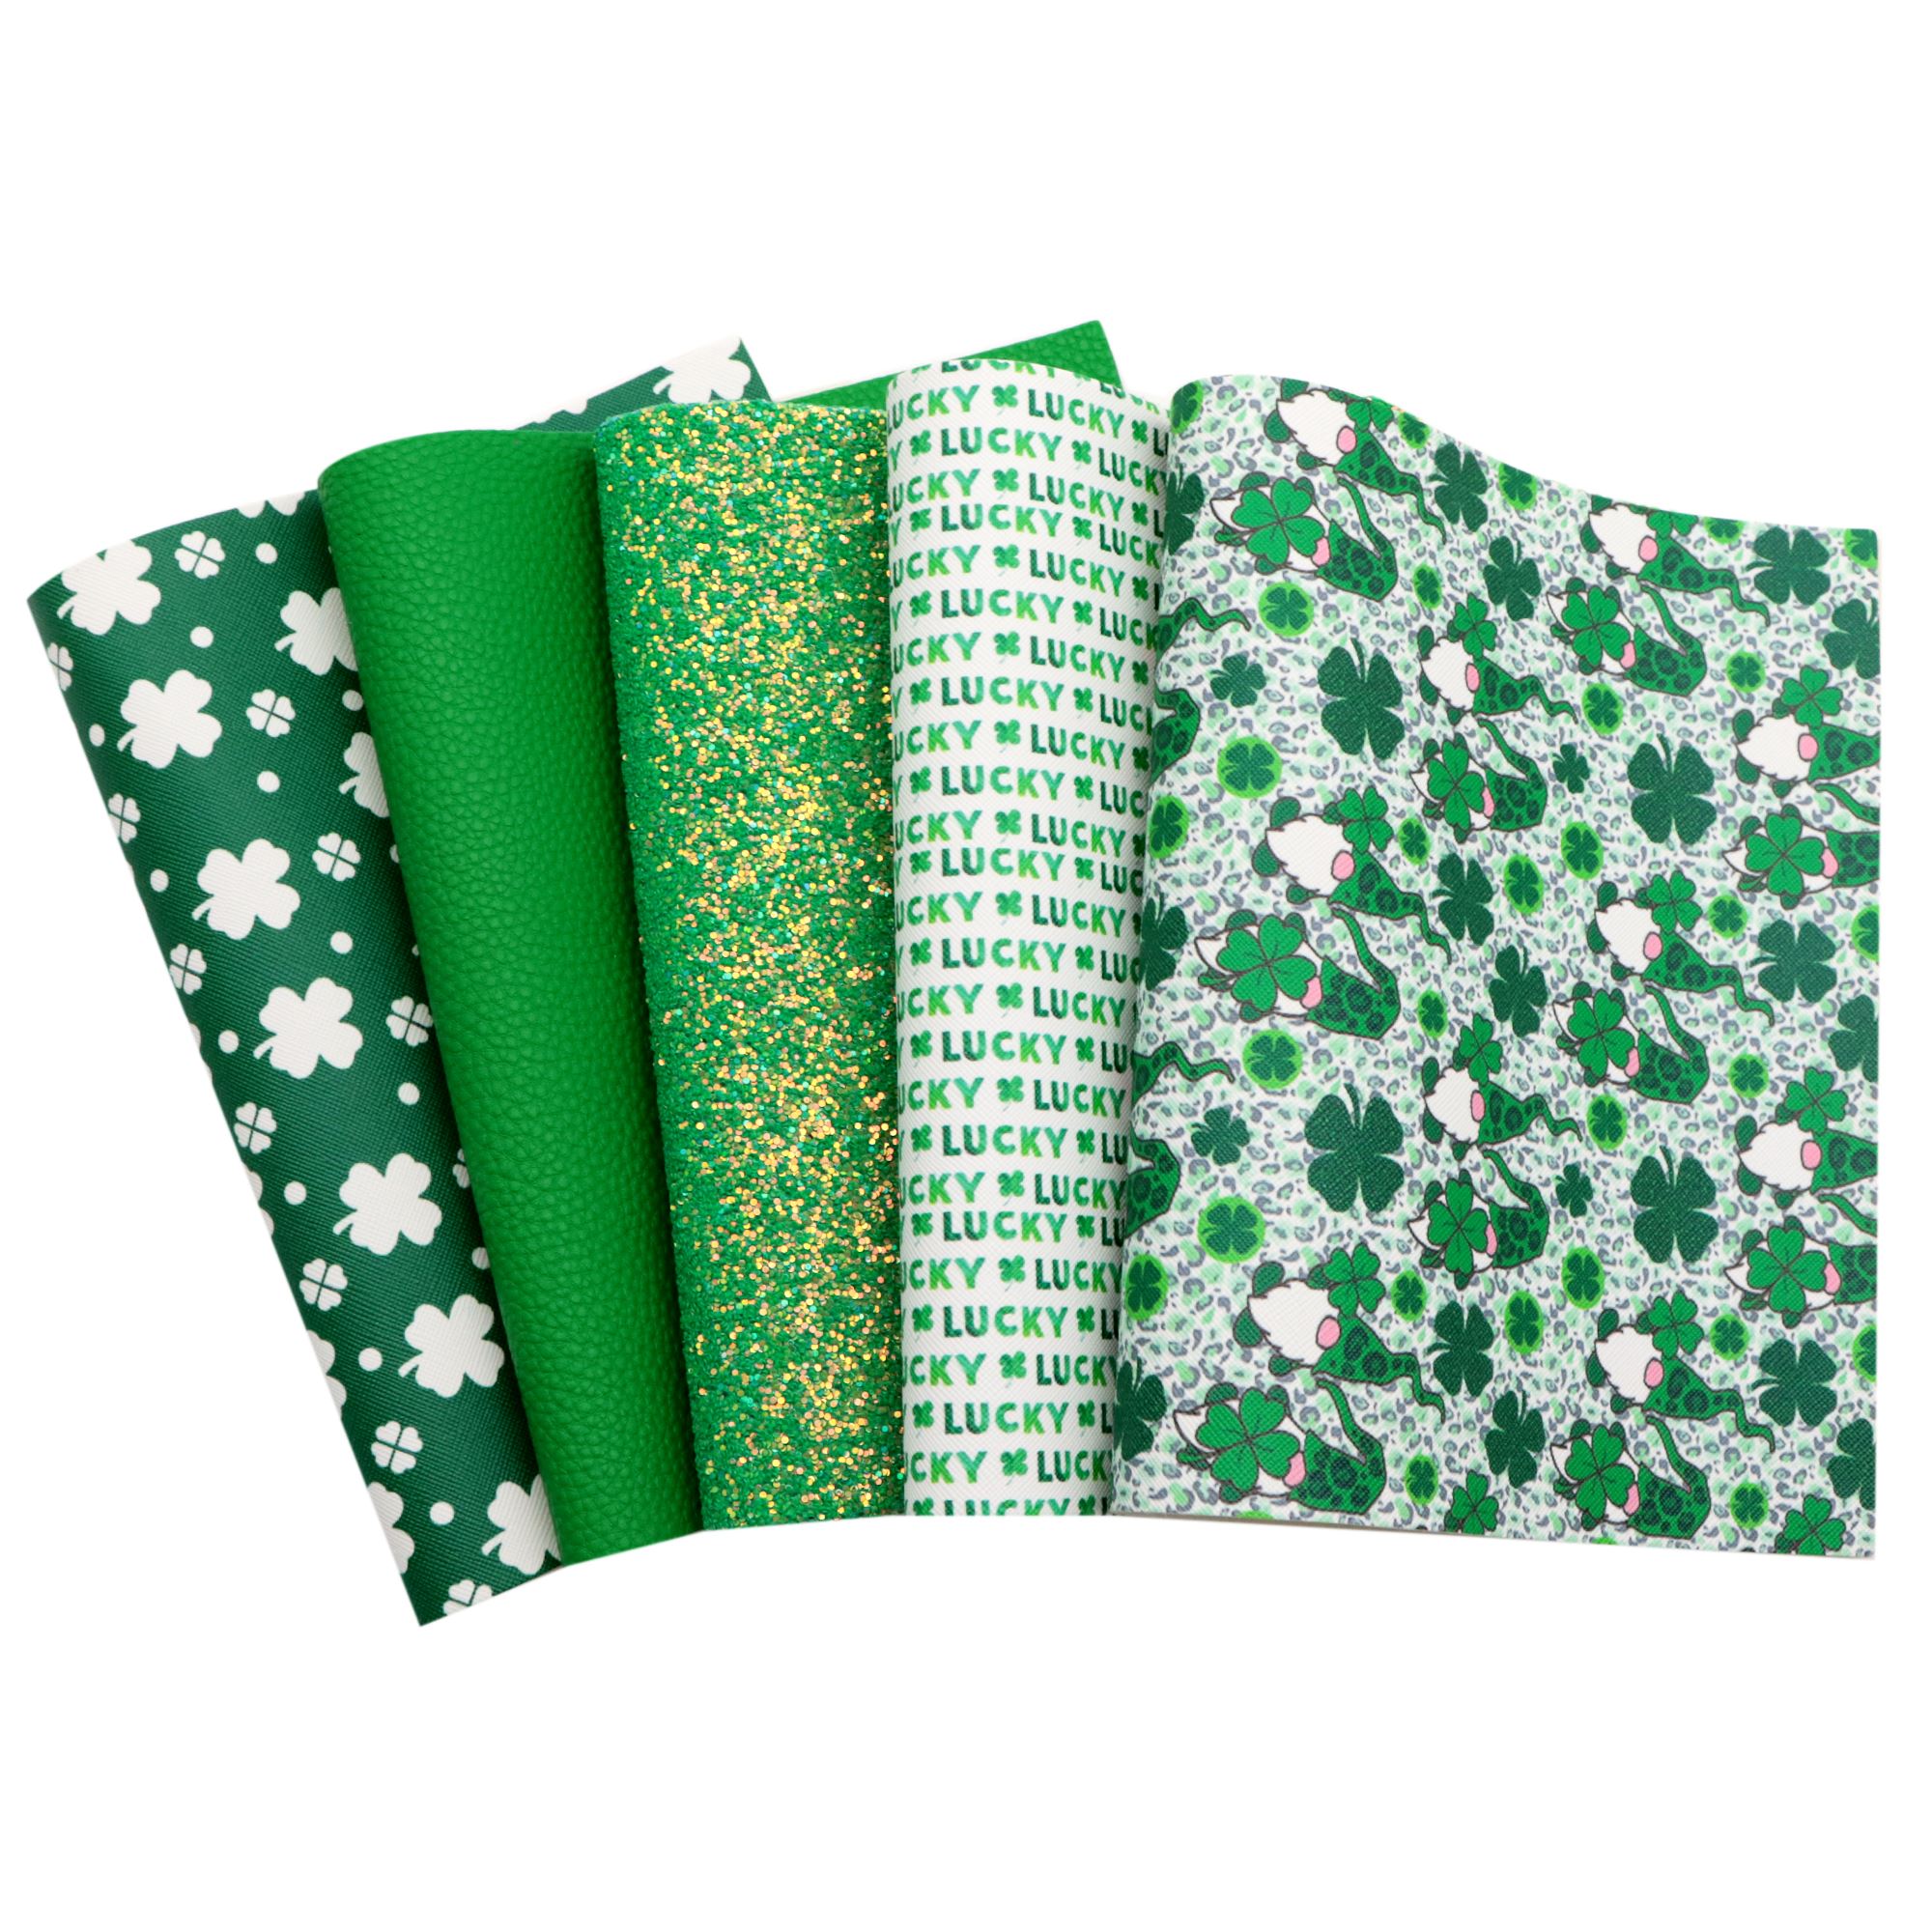 Green White Dots Faux Leather Sheet/printed Faux Leather for